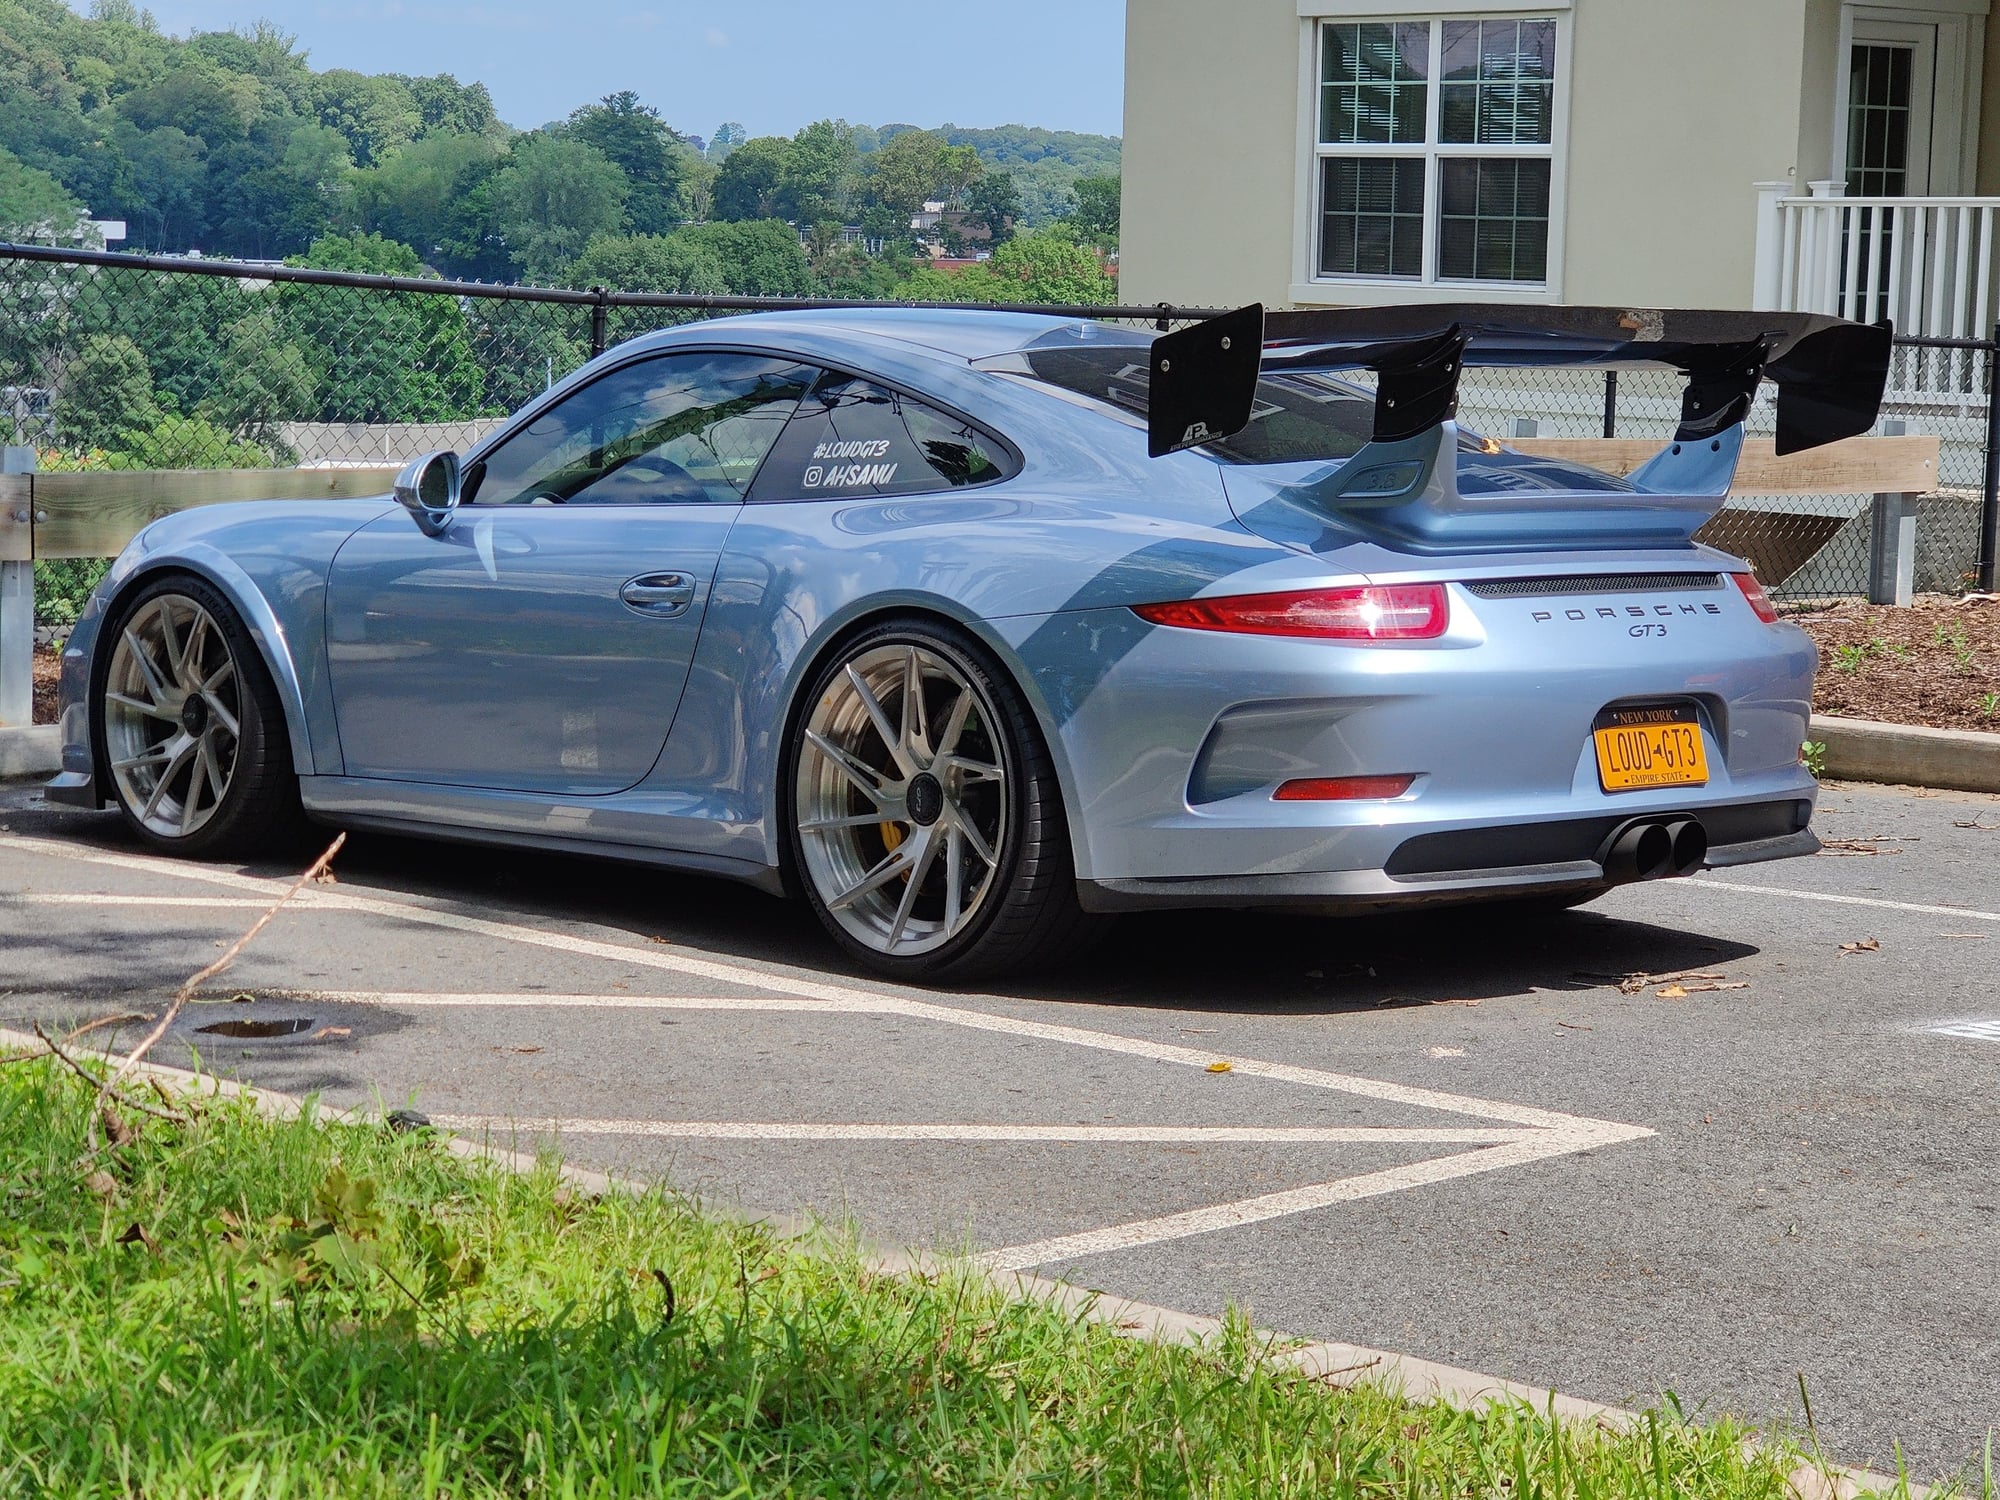 2015 Porsche GT3 - Non-Garage Queen 2015 PTS Ice Blue Metallic 991.1 GT3 - Used - VIN WP0AC2A96FS184247 - 41,000 Miles - 6 cyl - 2WD - Automatic - Coupe - Blue - New York City, NY 10469, United States